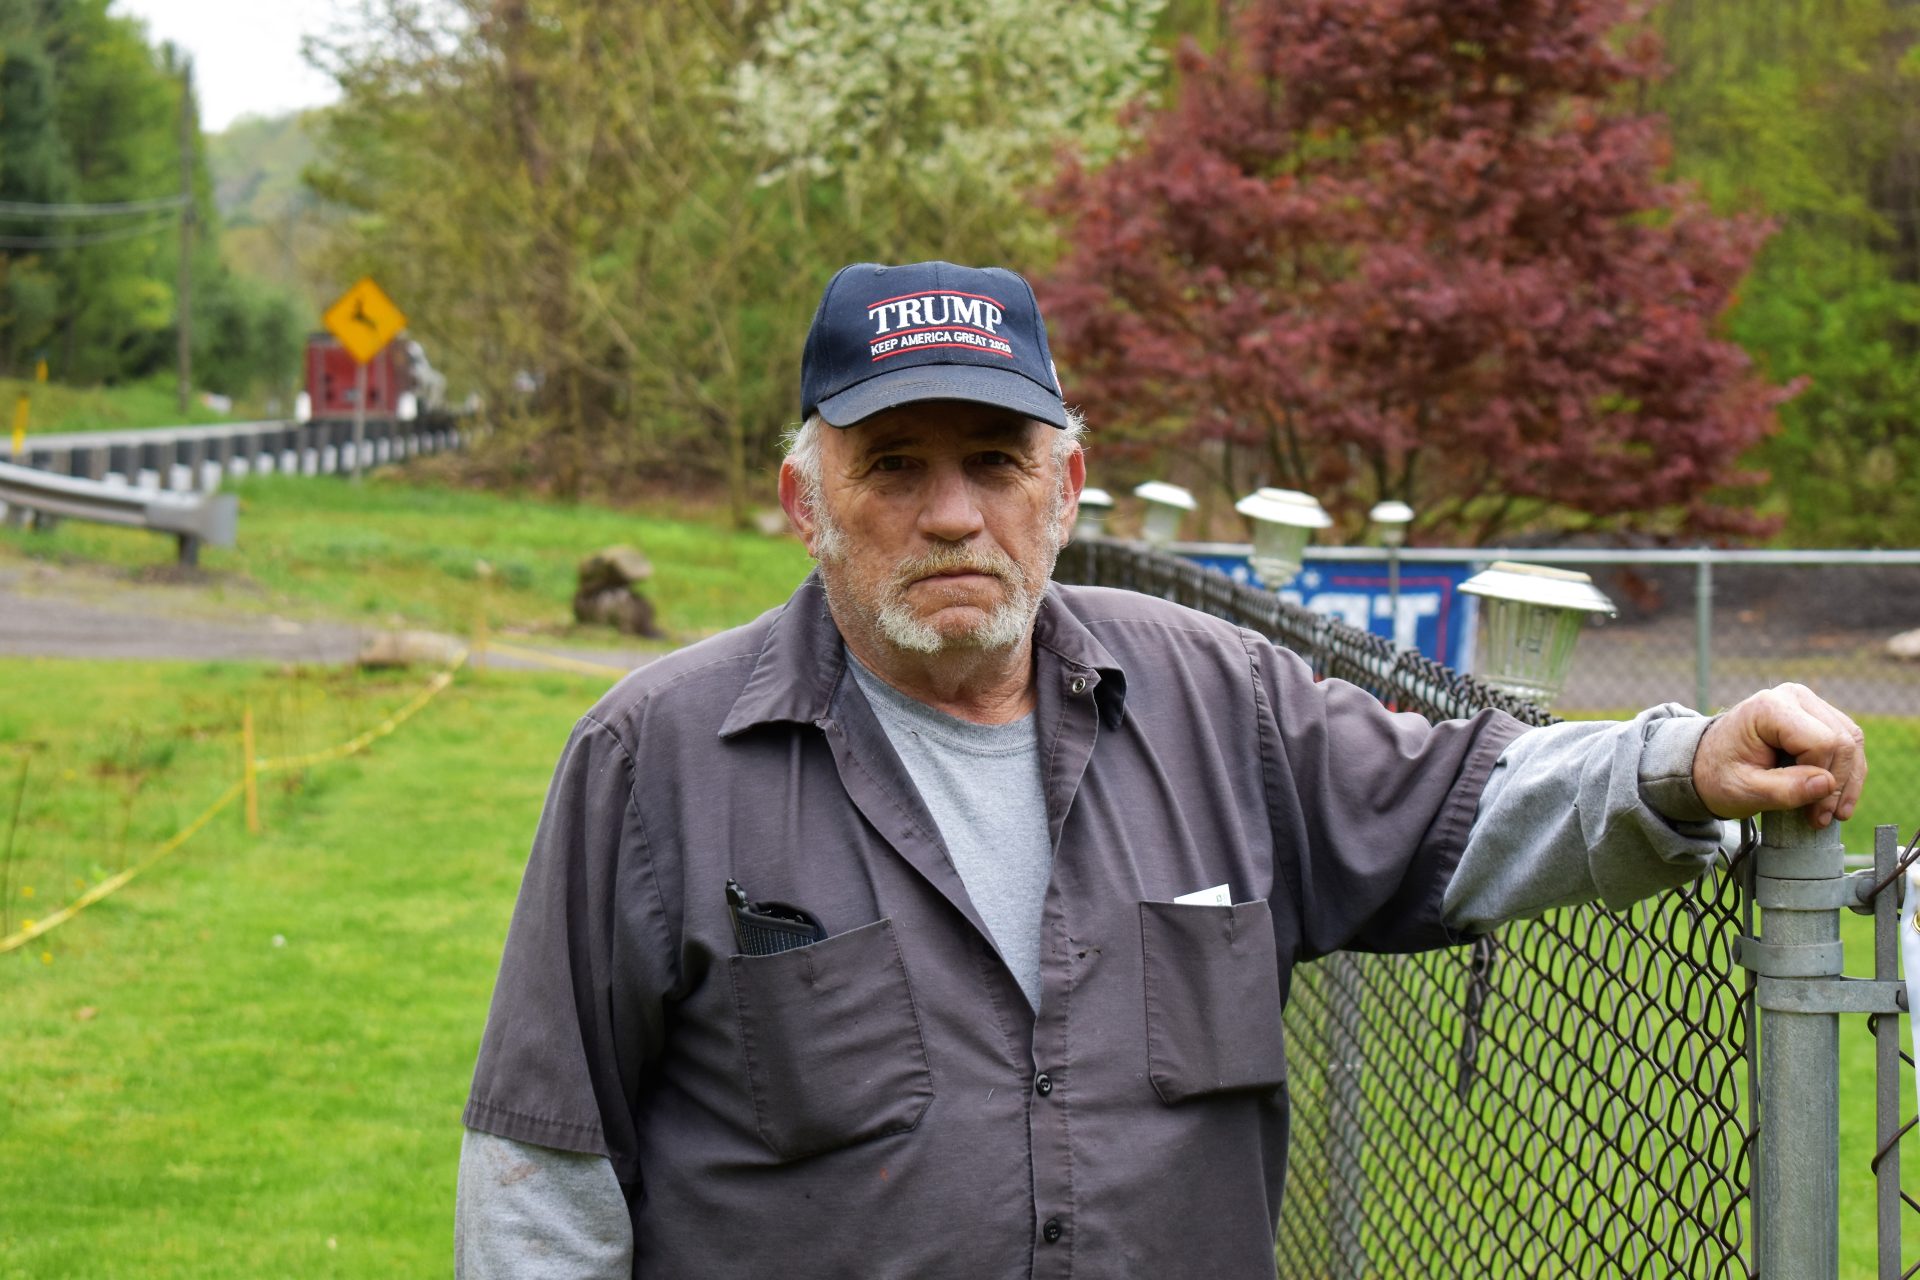 Daniel Klein, 69, is seen outside his home in Wyoming County on May 3, 2019.